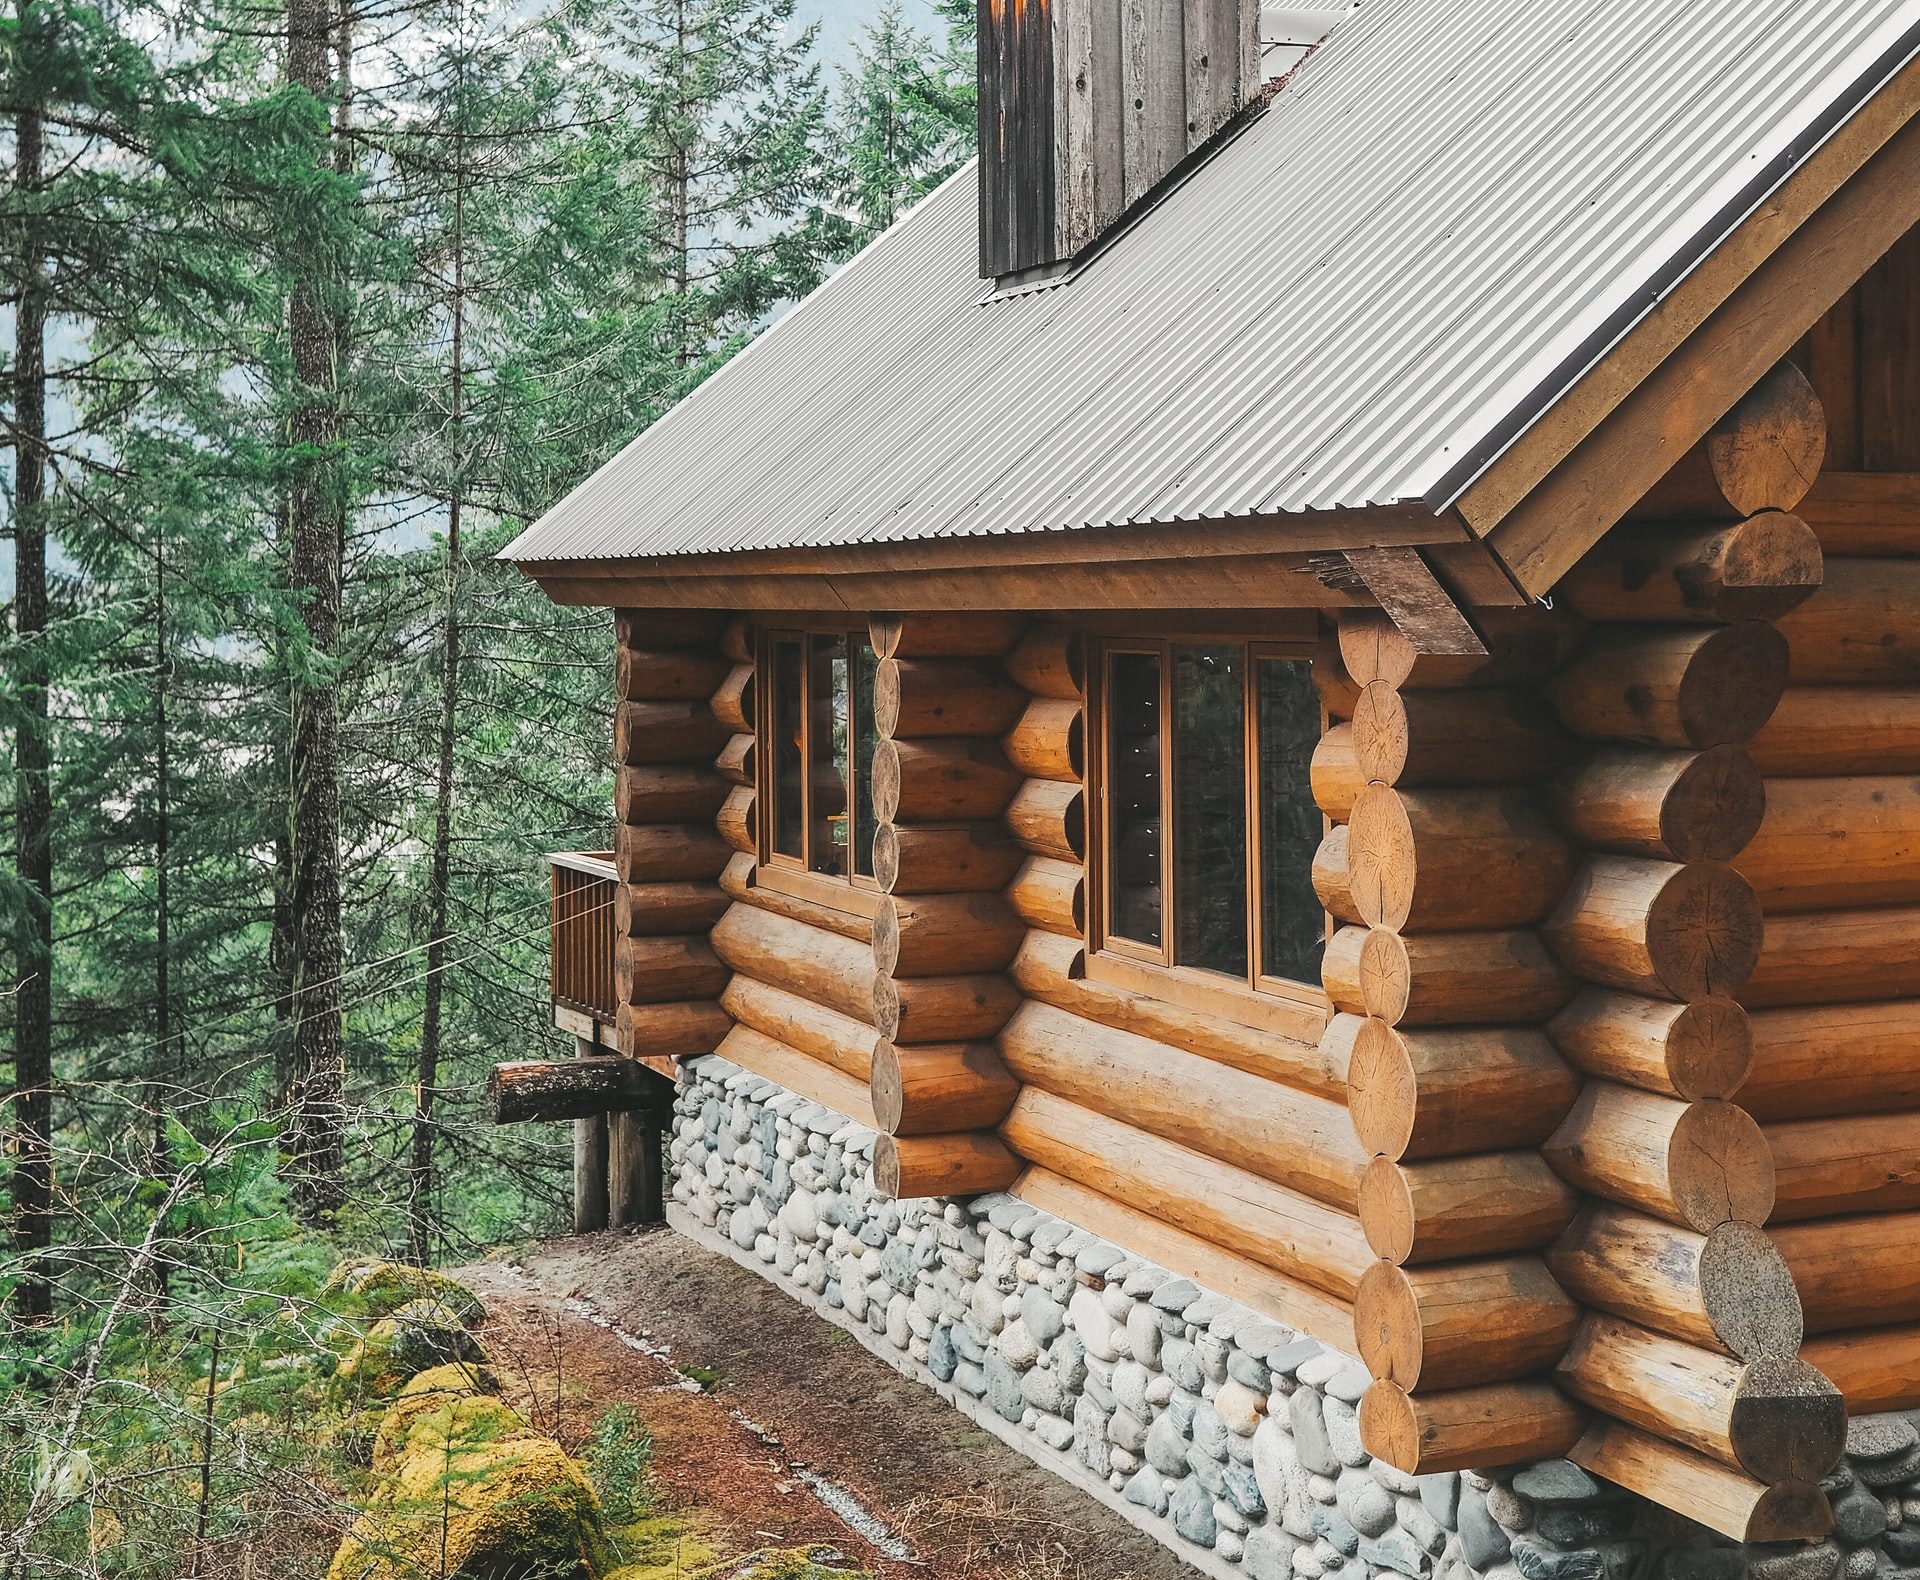 Do Logs Insulate Well? How to Get a Log Cabin to Hold Heat